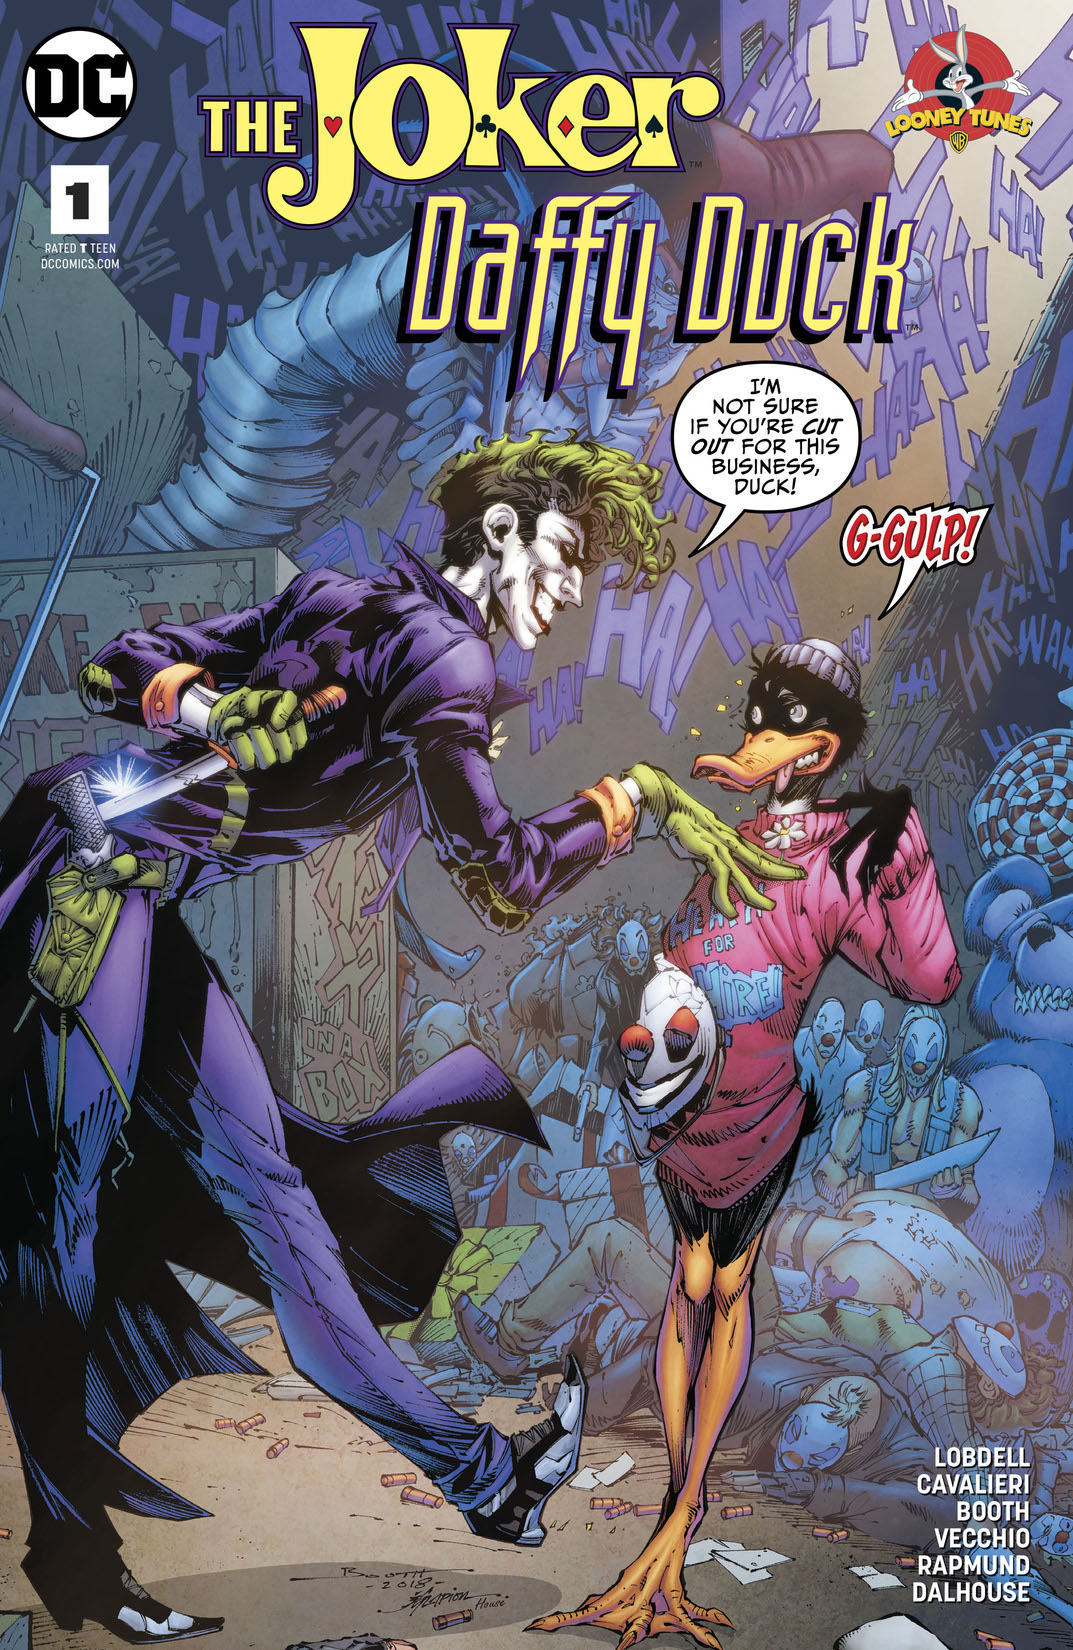 The Joker/Daffy Duck #1 preview images